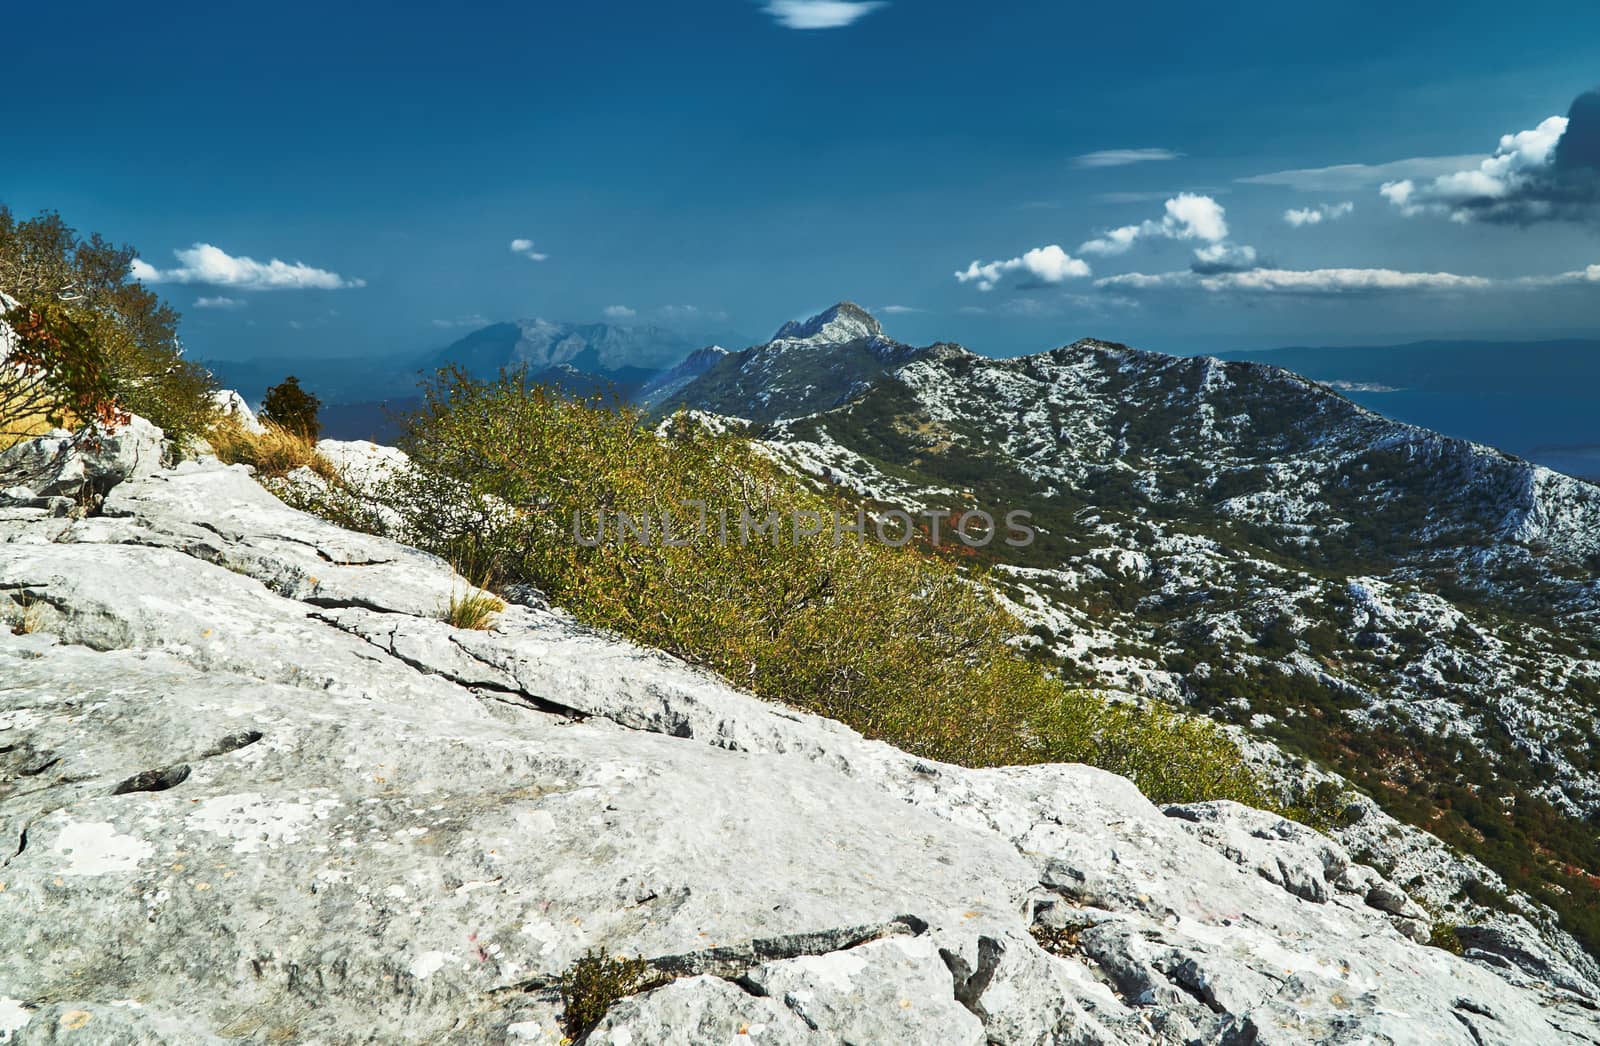 Rocks and peaks in the Mosor massif in the Dinaric mountains in Croatia